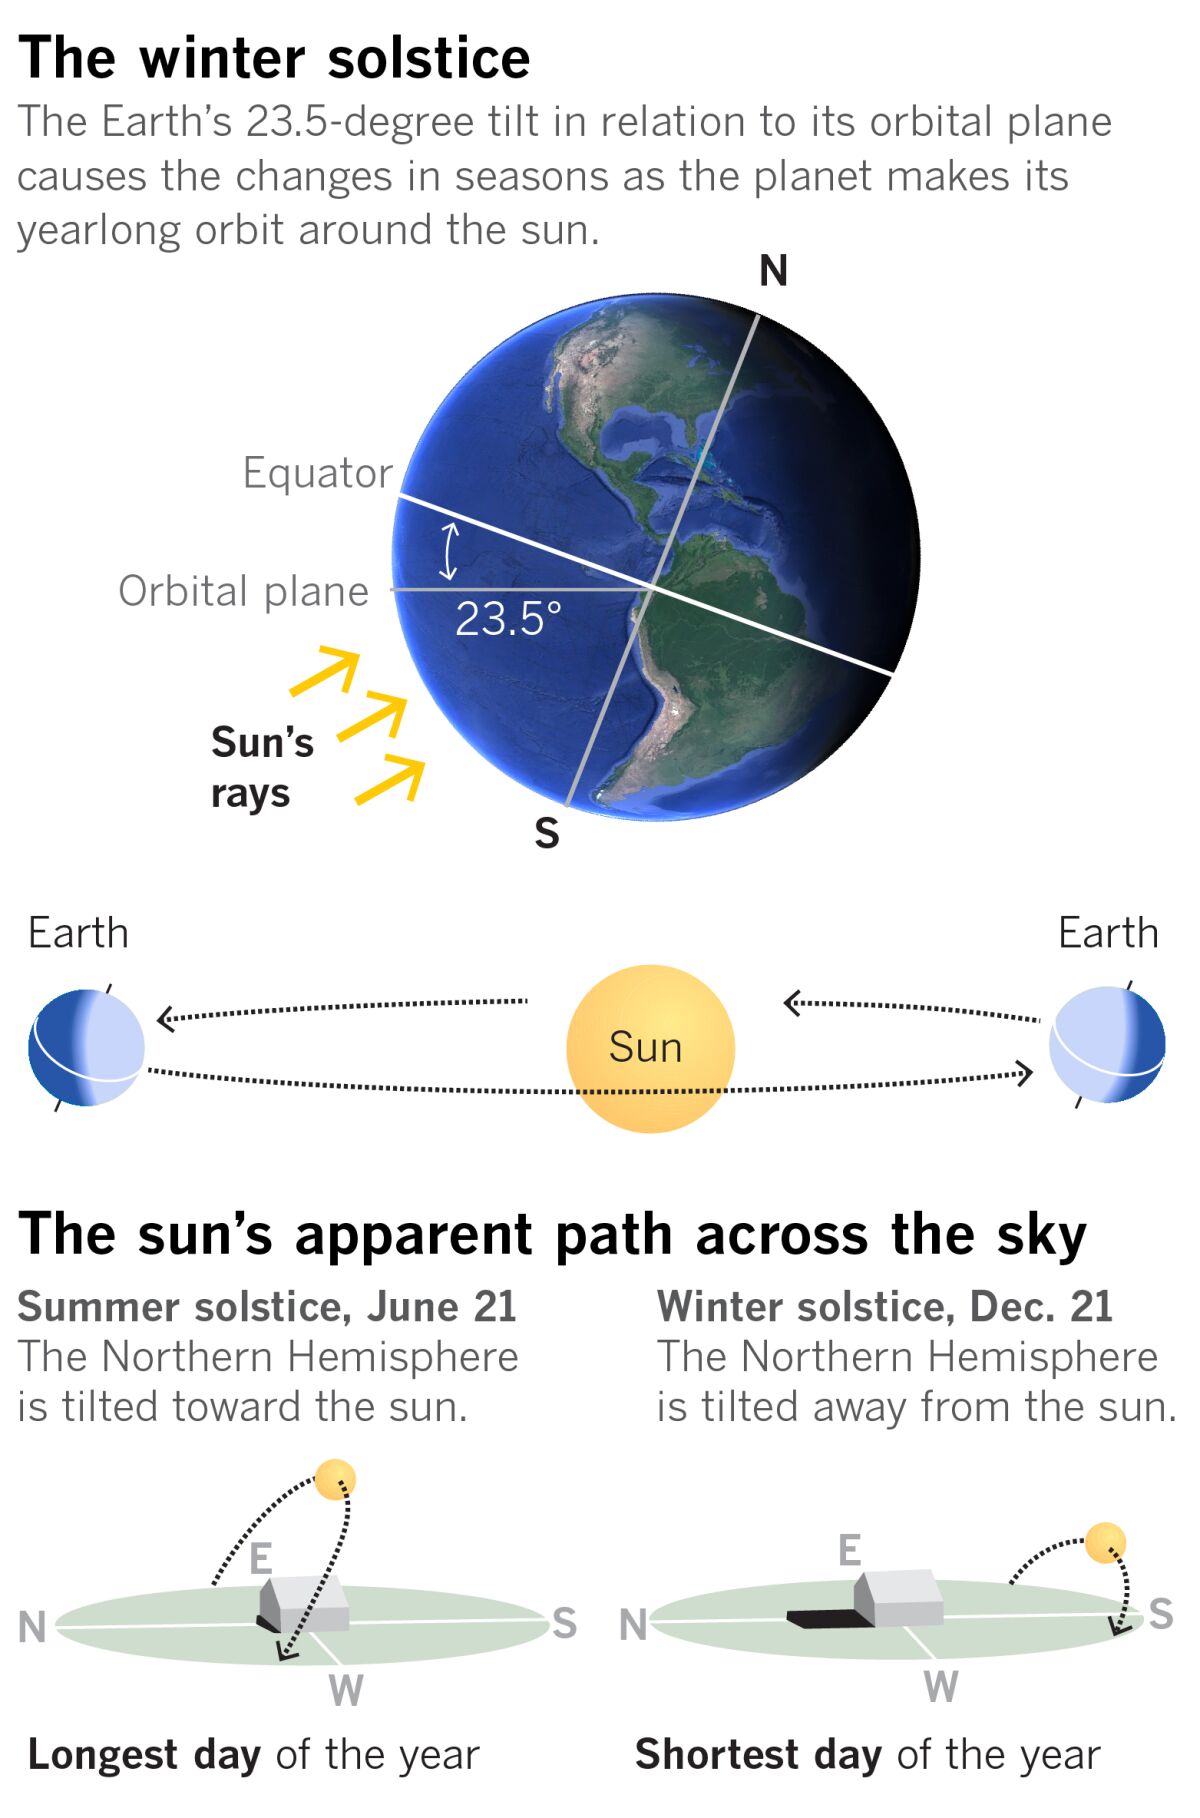 What is the winter solstice?